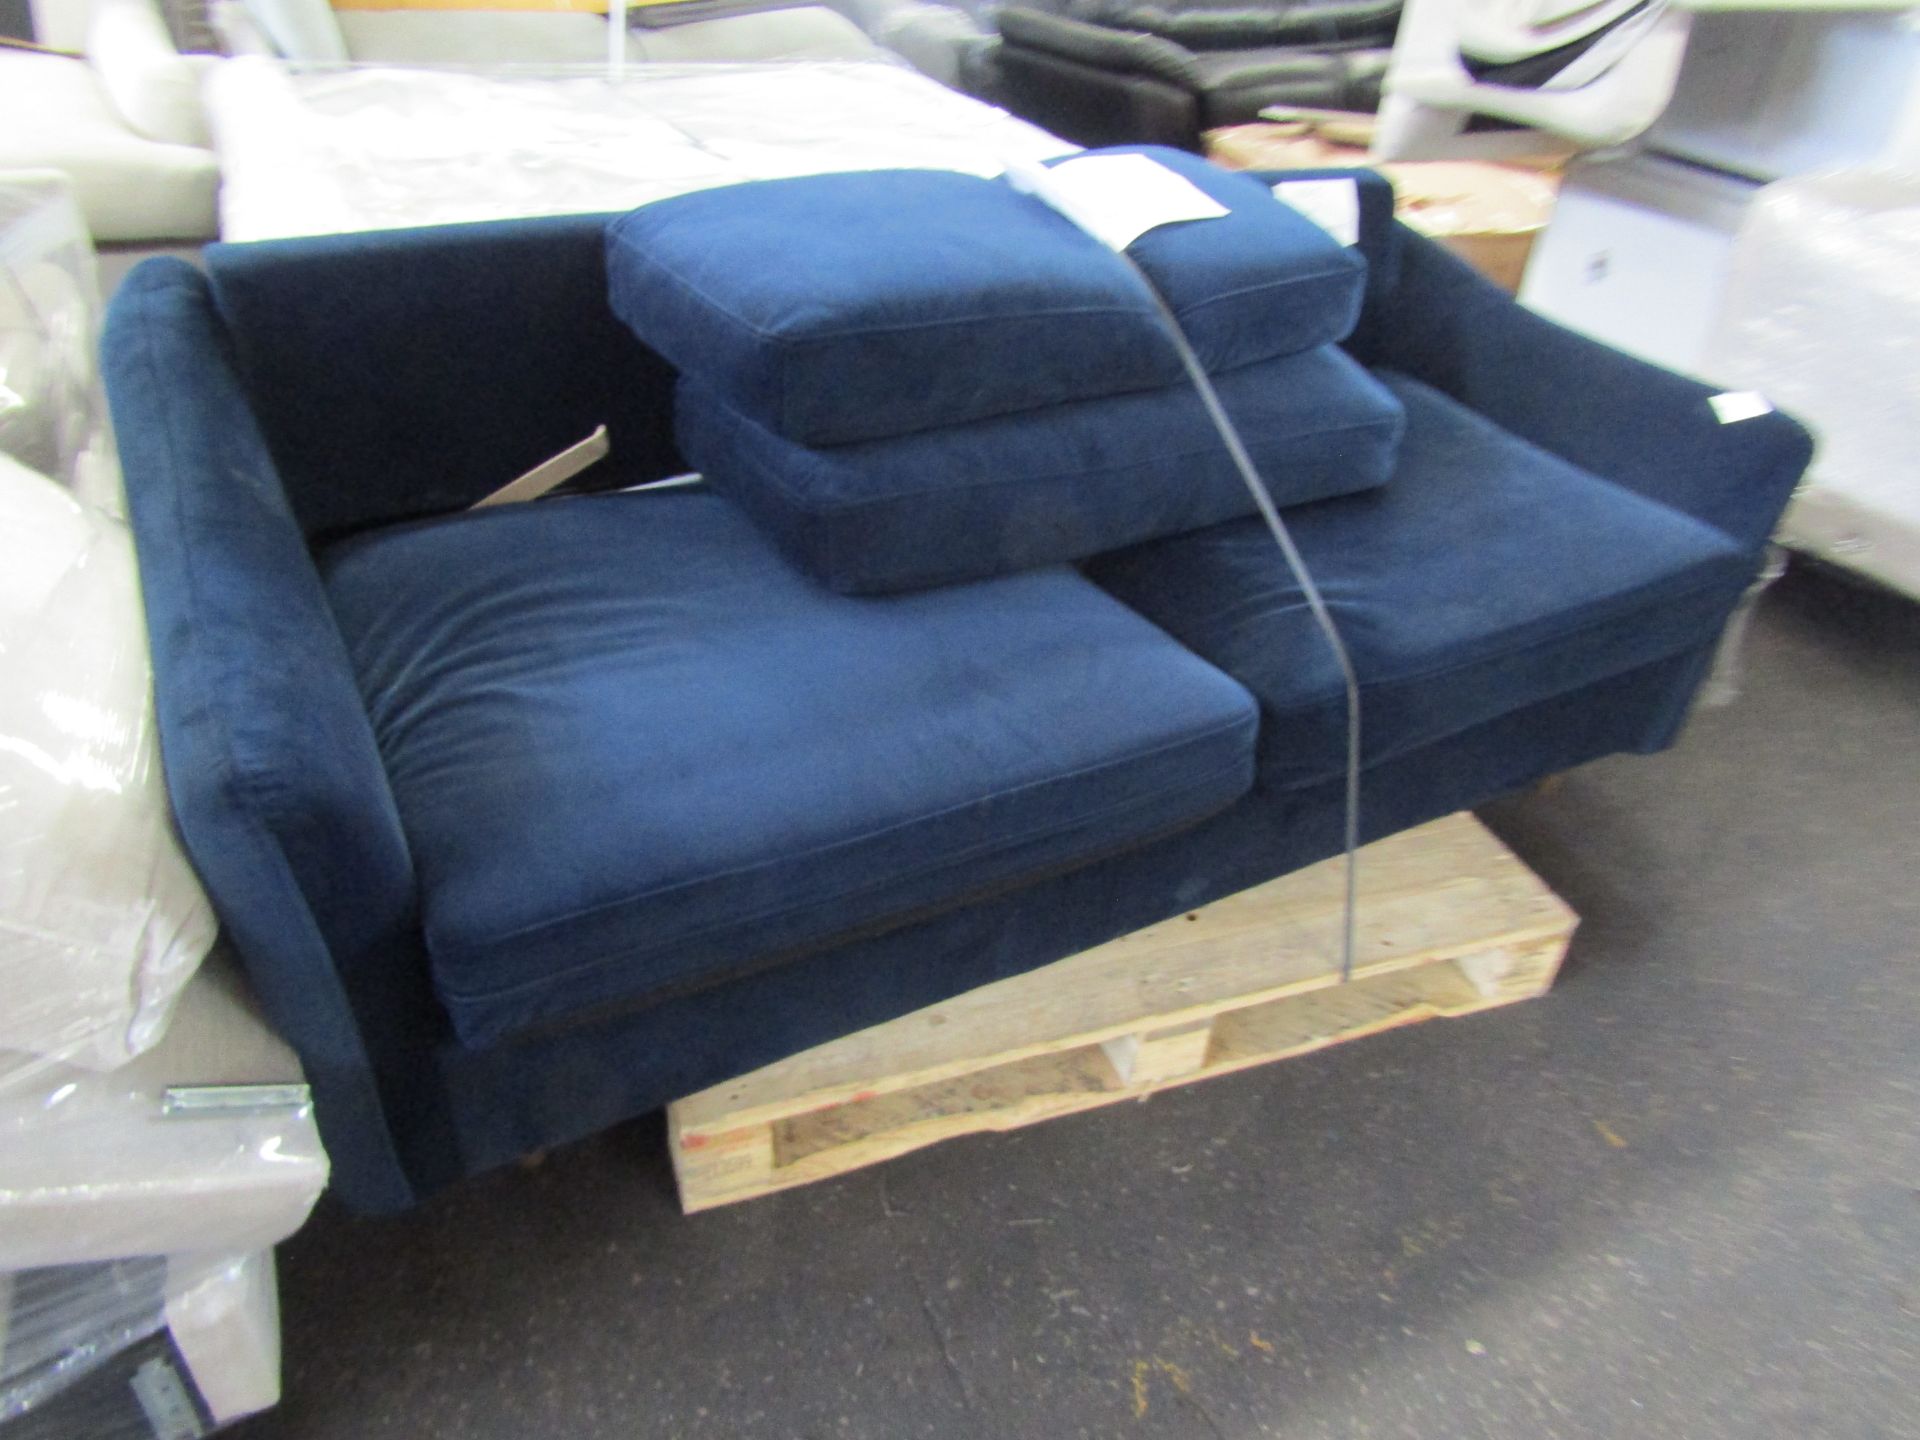 The Rebel 3 Seater Sofa Bed in Navy with Brown Legs RRP 2149 About the Product(s) The Rebel 3 Seater